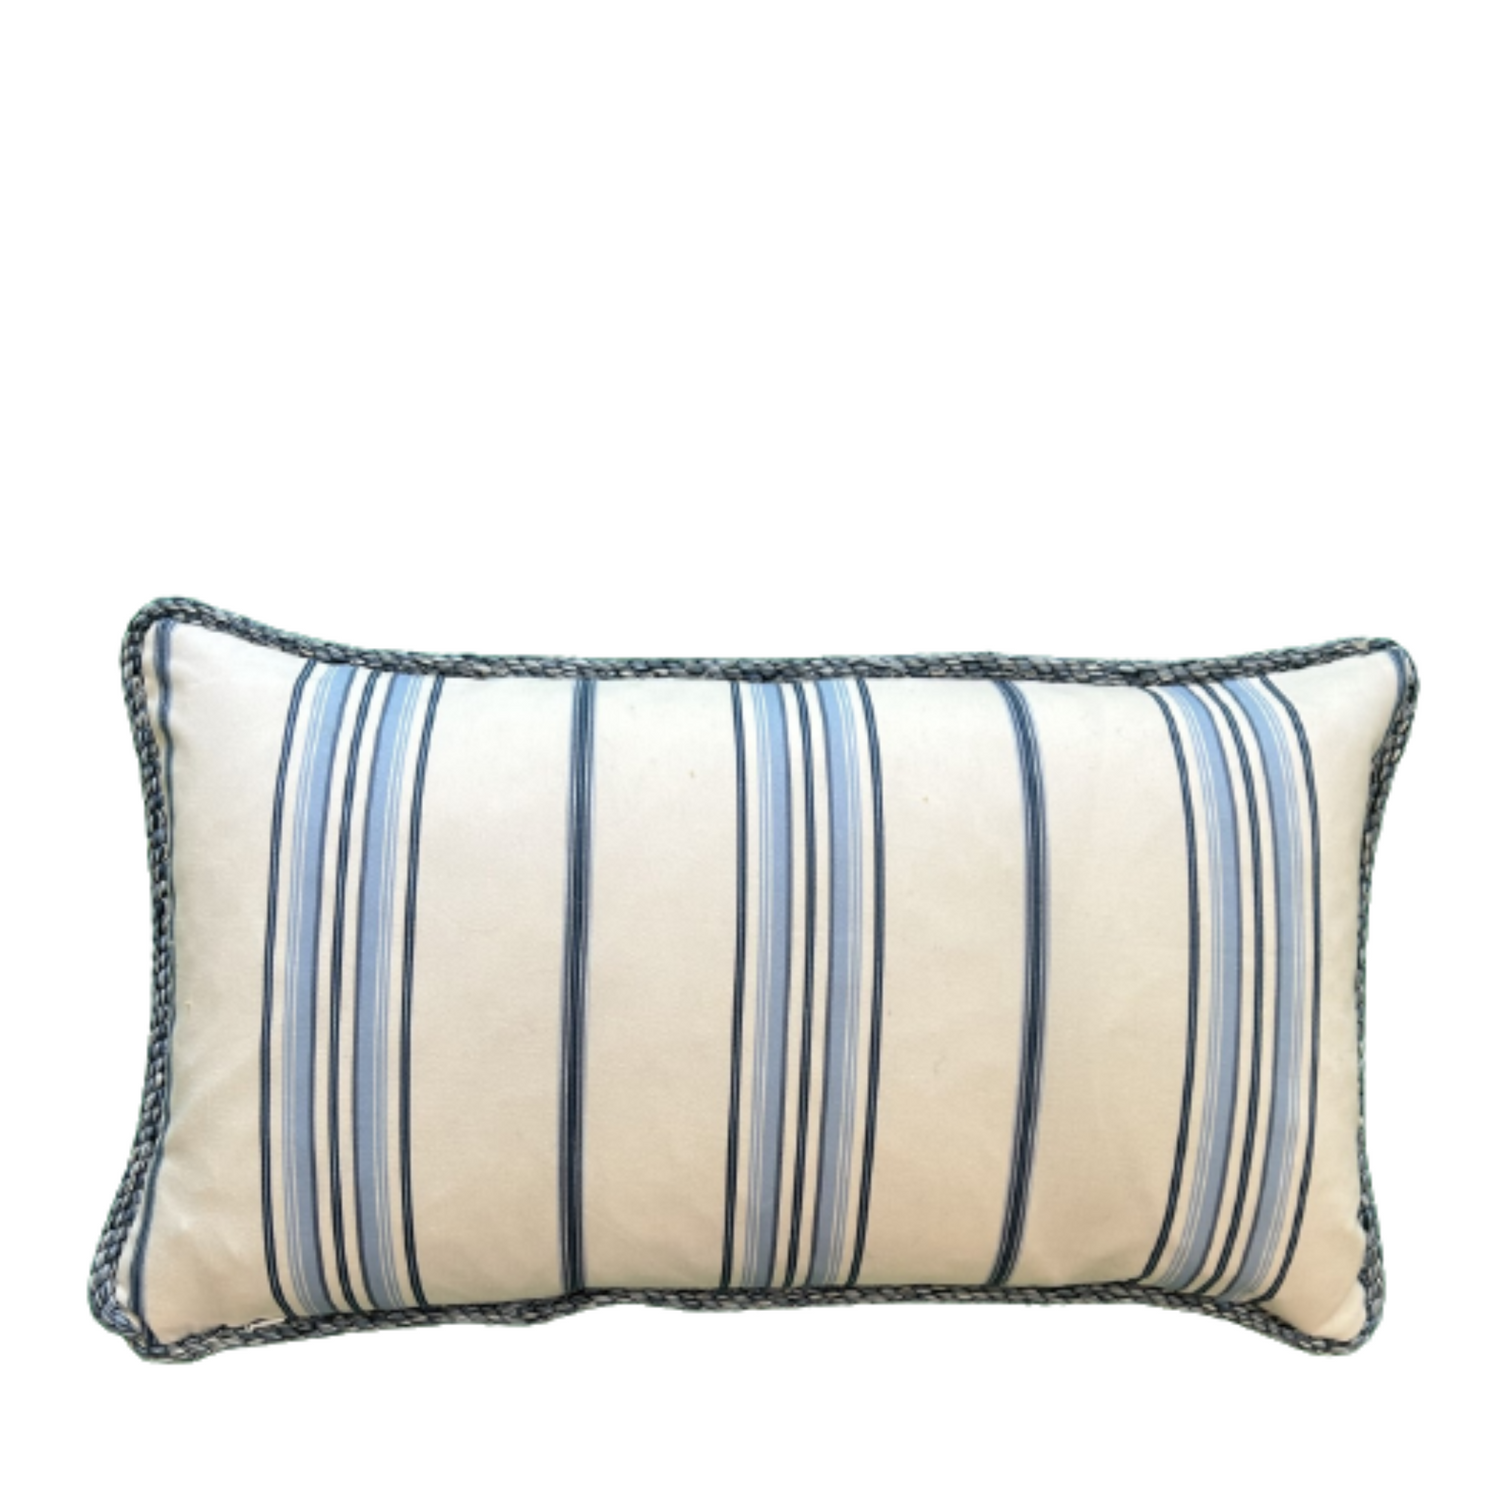 Shells with Blue and White 12 x 20 Decorative Pillow with Down Feather Insert